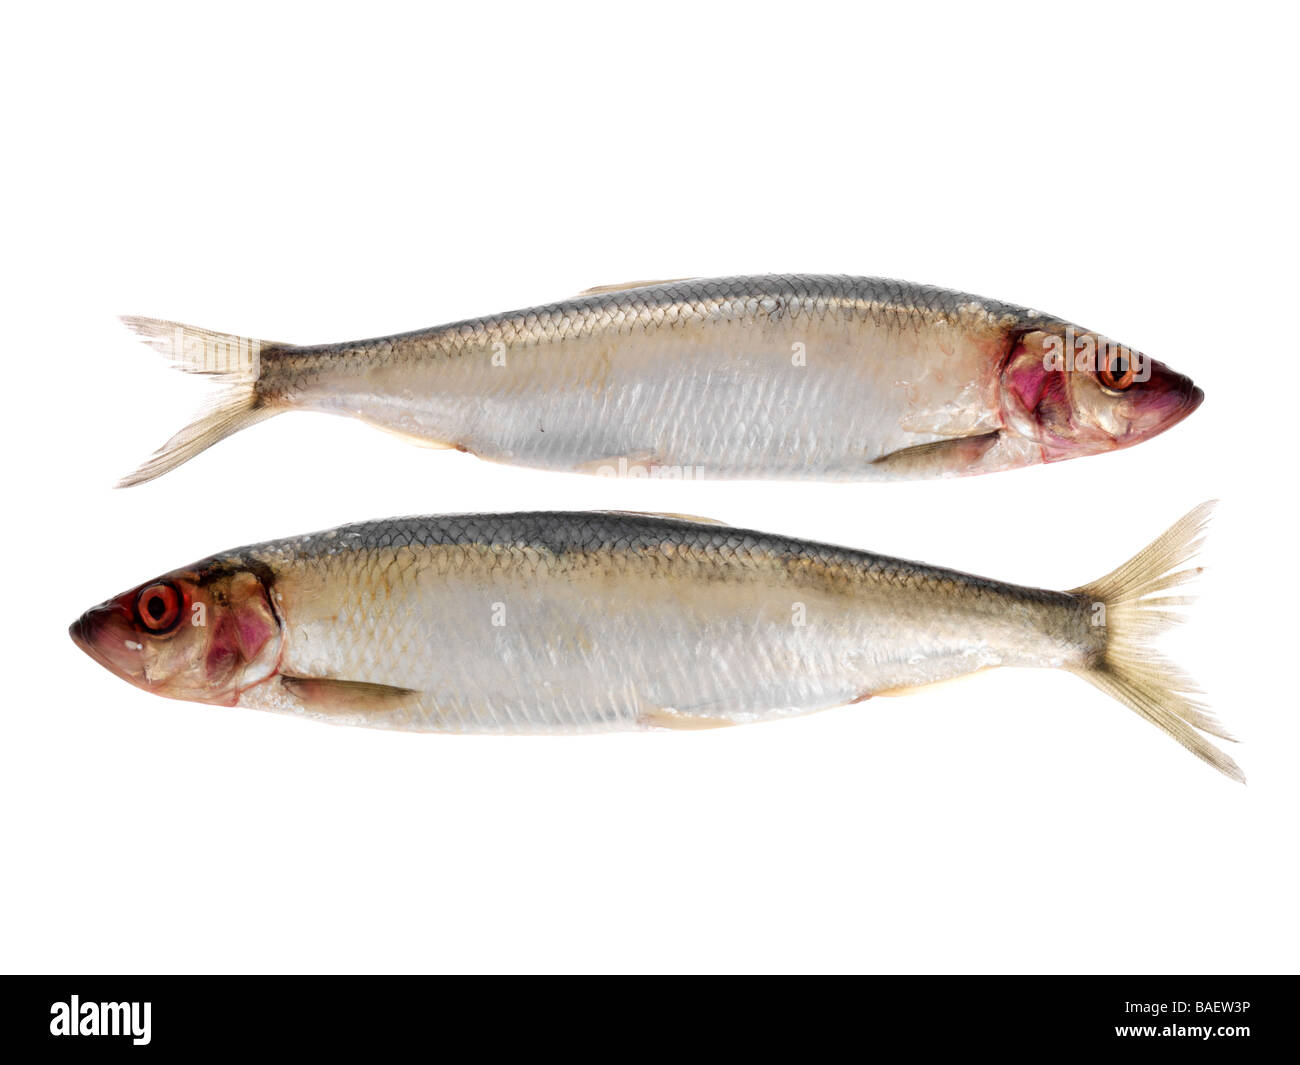 Fresh Healthy Raw Uncooked Whole Herring Fish Ready To Fillet And Cook Isolated Against A White Background With No People And A Clipping Path Stock Photo